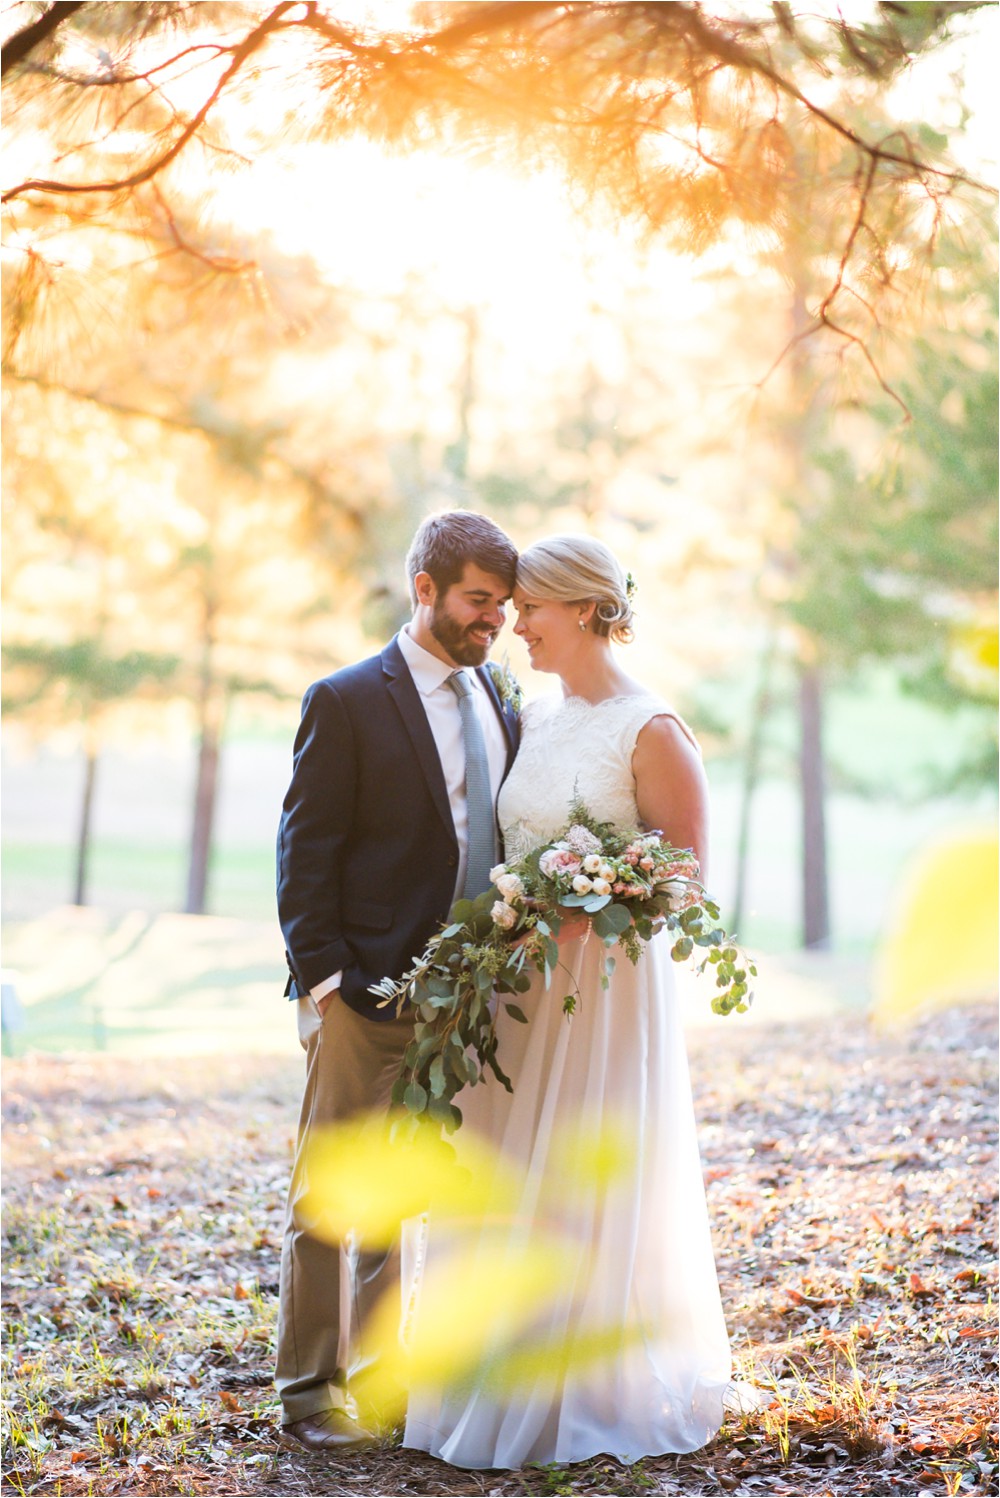 intimate-outdoor-wedding-at-home-in-columbus-georgia-by-eliza-morrill-photography_0049